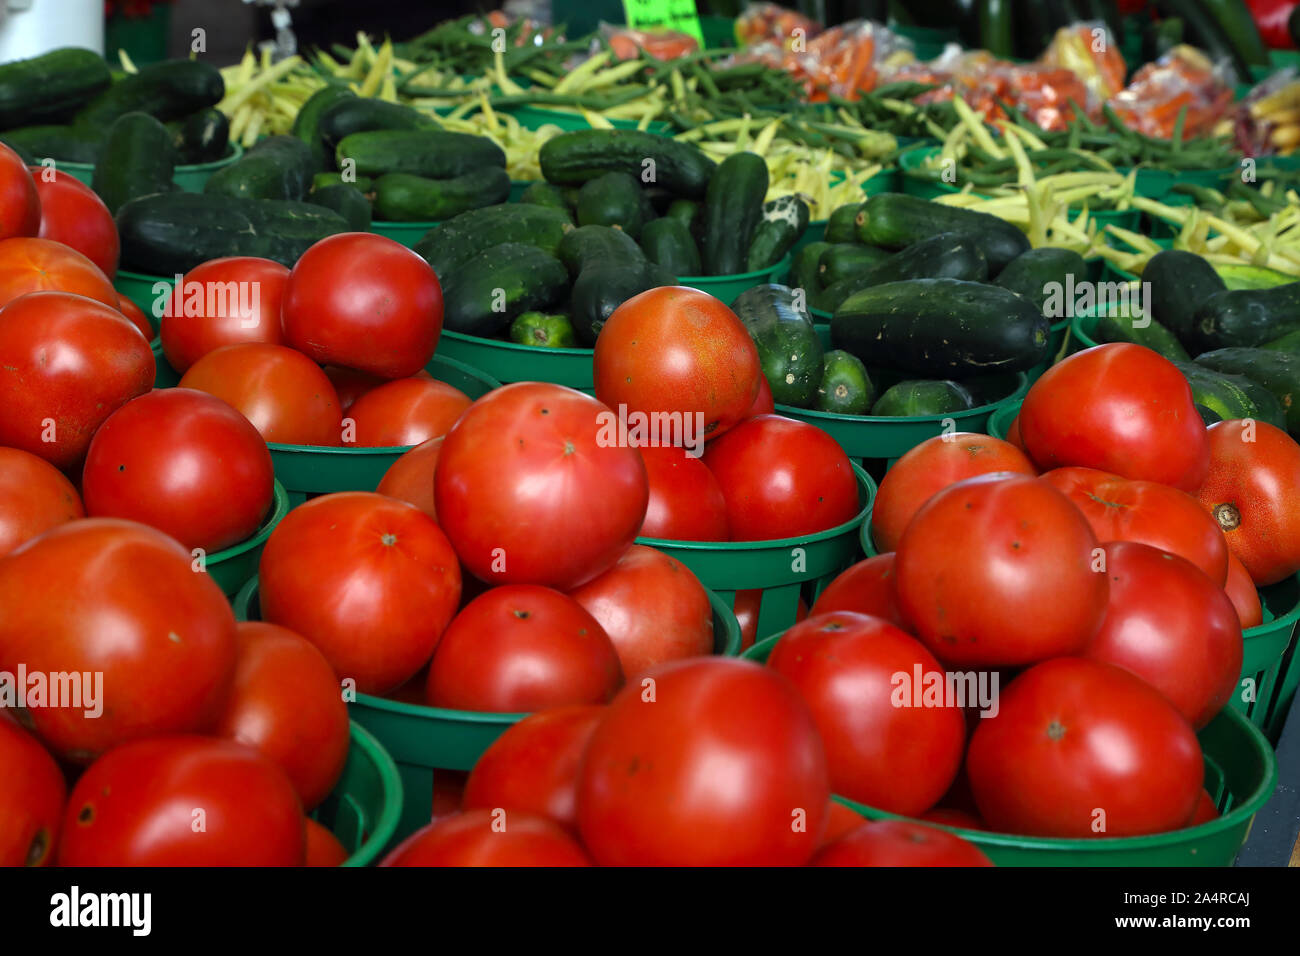 Biologic, natural cultivated tomatoes on a market counter. Vegetables from the farmers market. Ecologic products. Natural background. Stock Photo